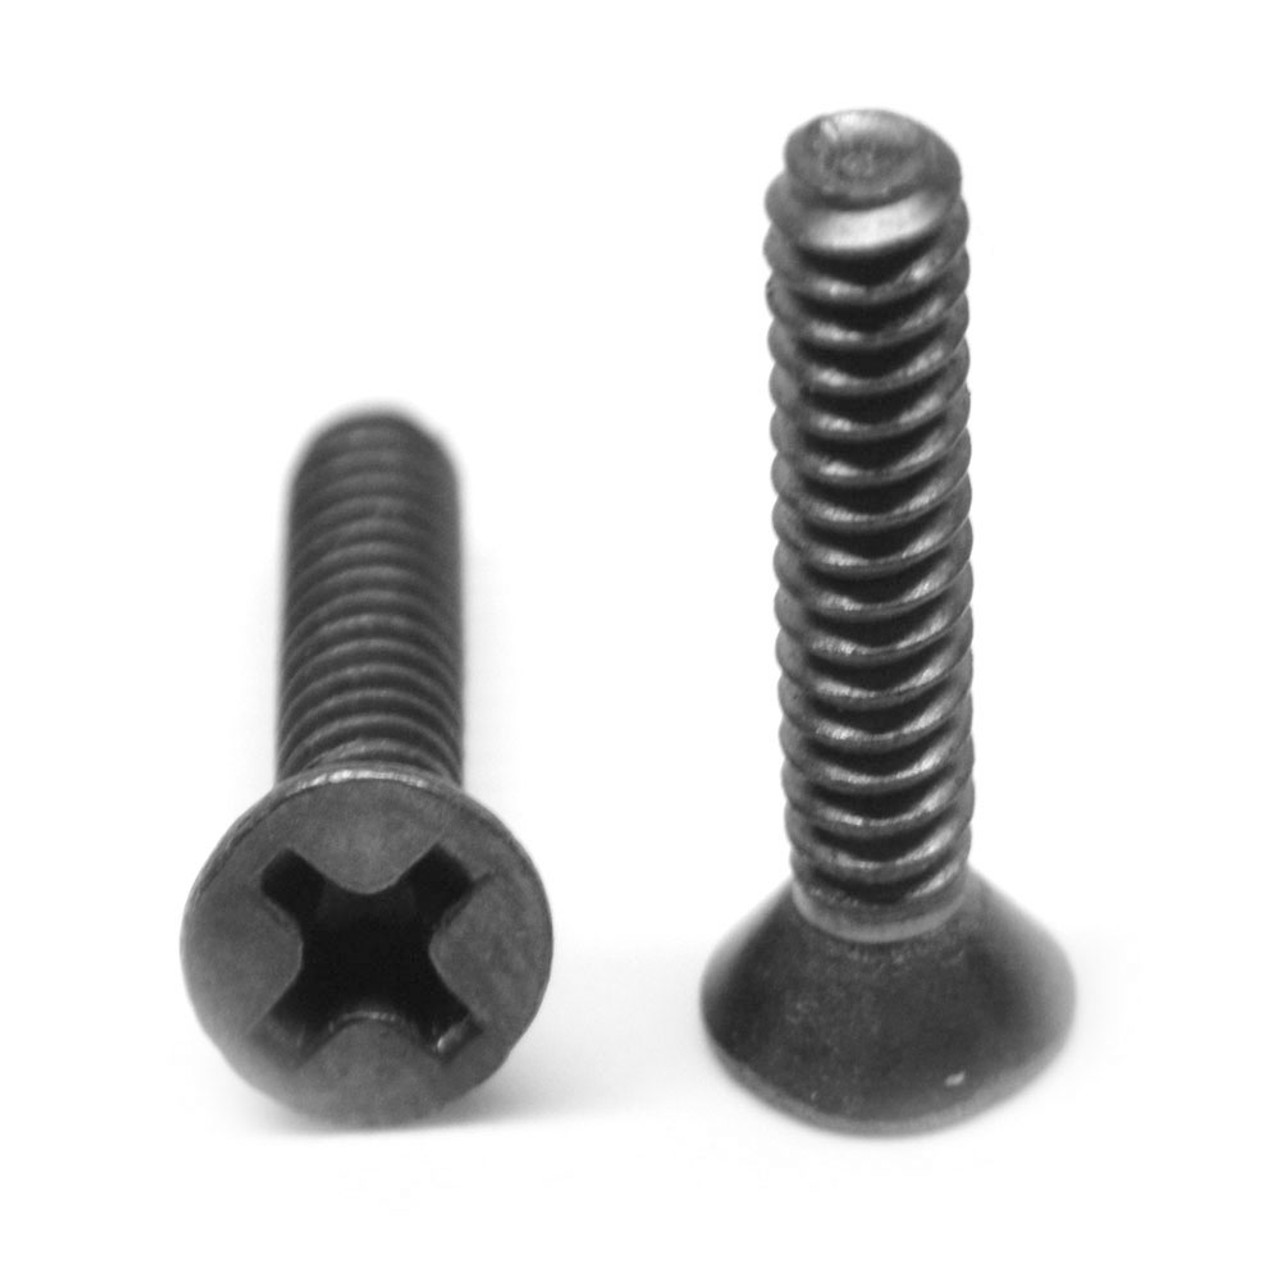 Pack of 5 Prime-Line 9131492 Machine Screw Grade A2-70 Stainless Steel Pan Head Phillips M5-0.8 X 80mm